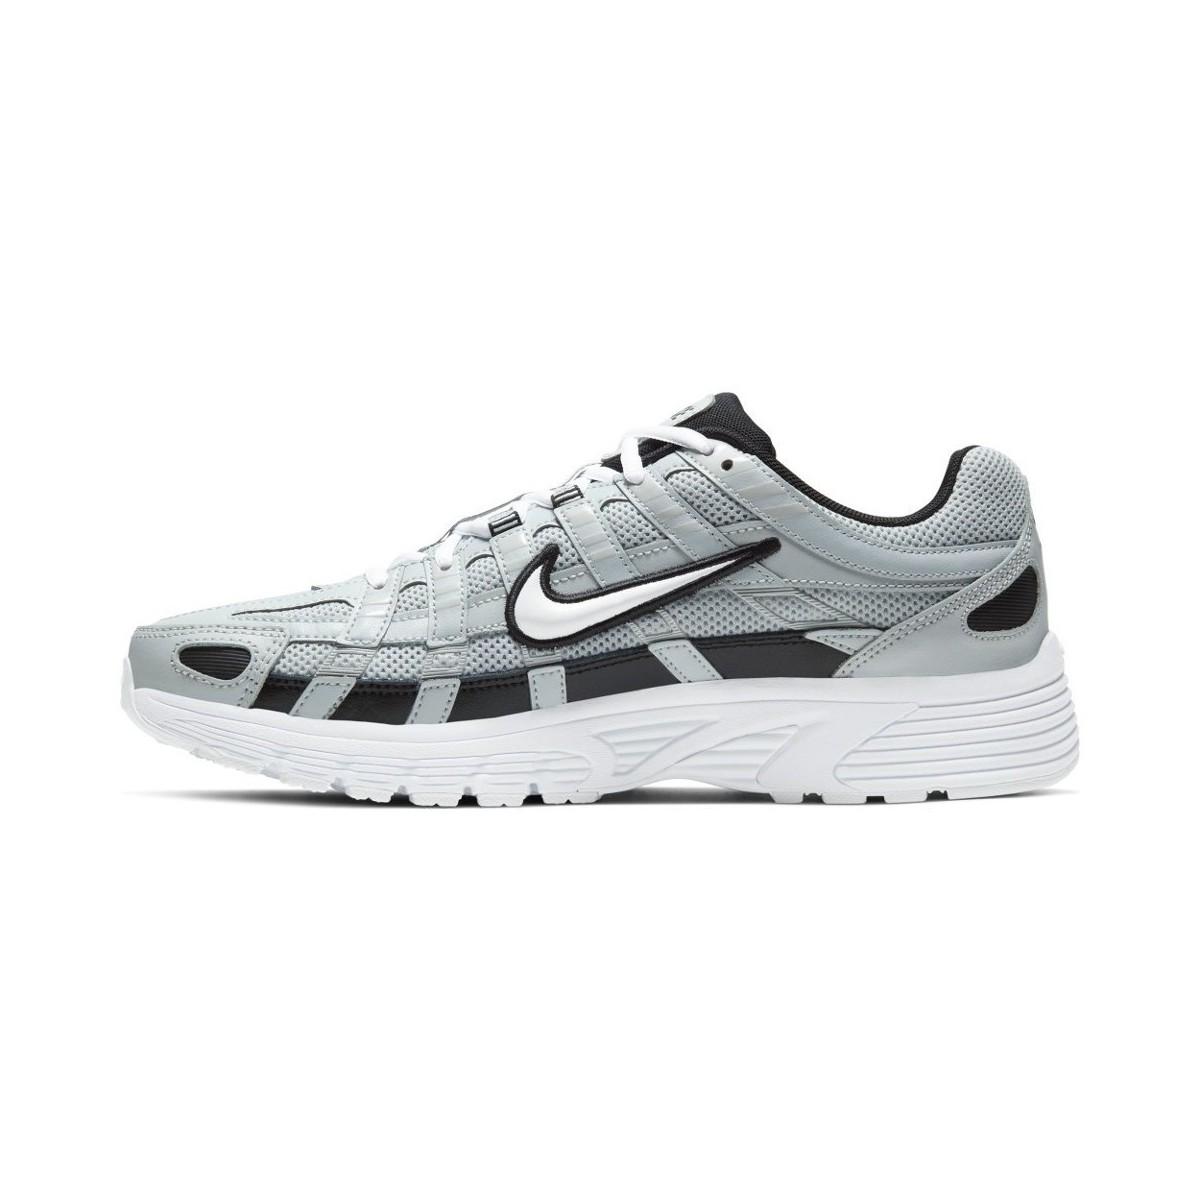 Nike P6000 Shoes (trainers) in Grey for Men - Lyst